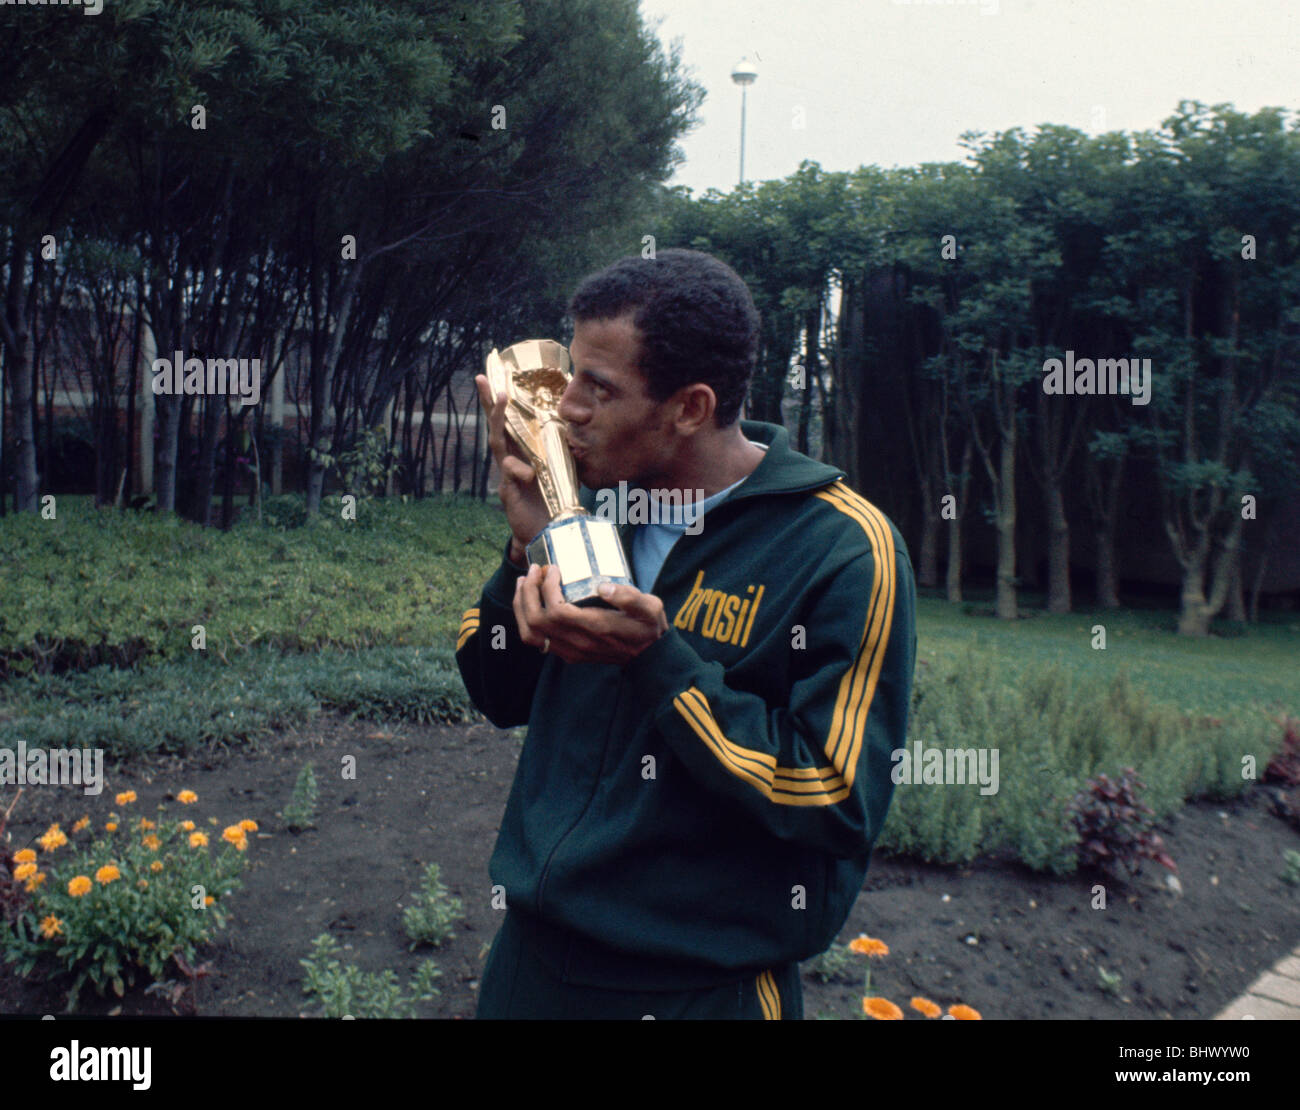 Brazil captain Carlos Alberto kisses Jules Rimet World cup trophy following successful World Cup tournament in Mexico June 1970 Stock Photo